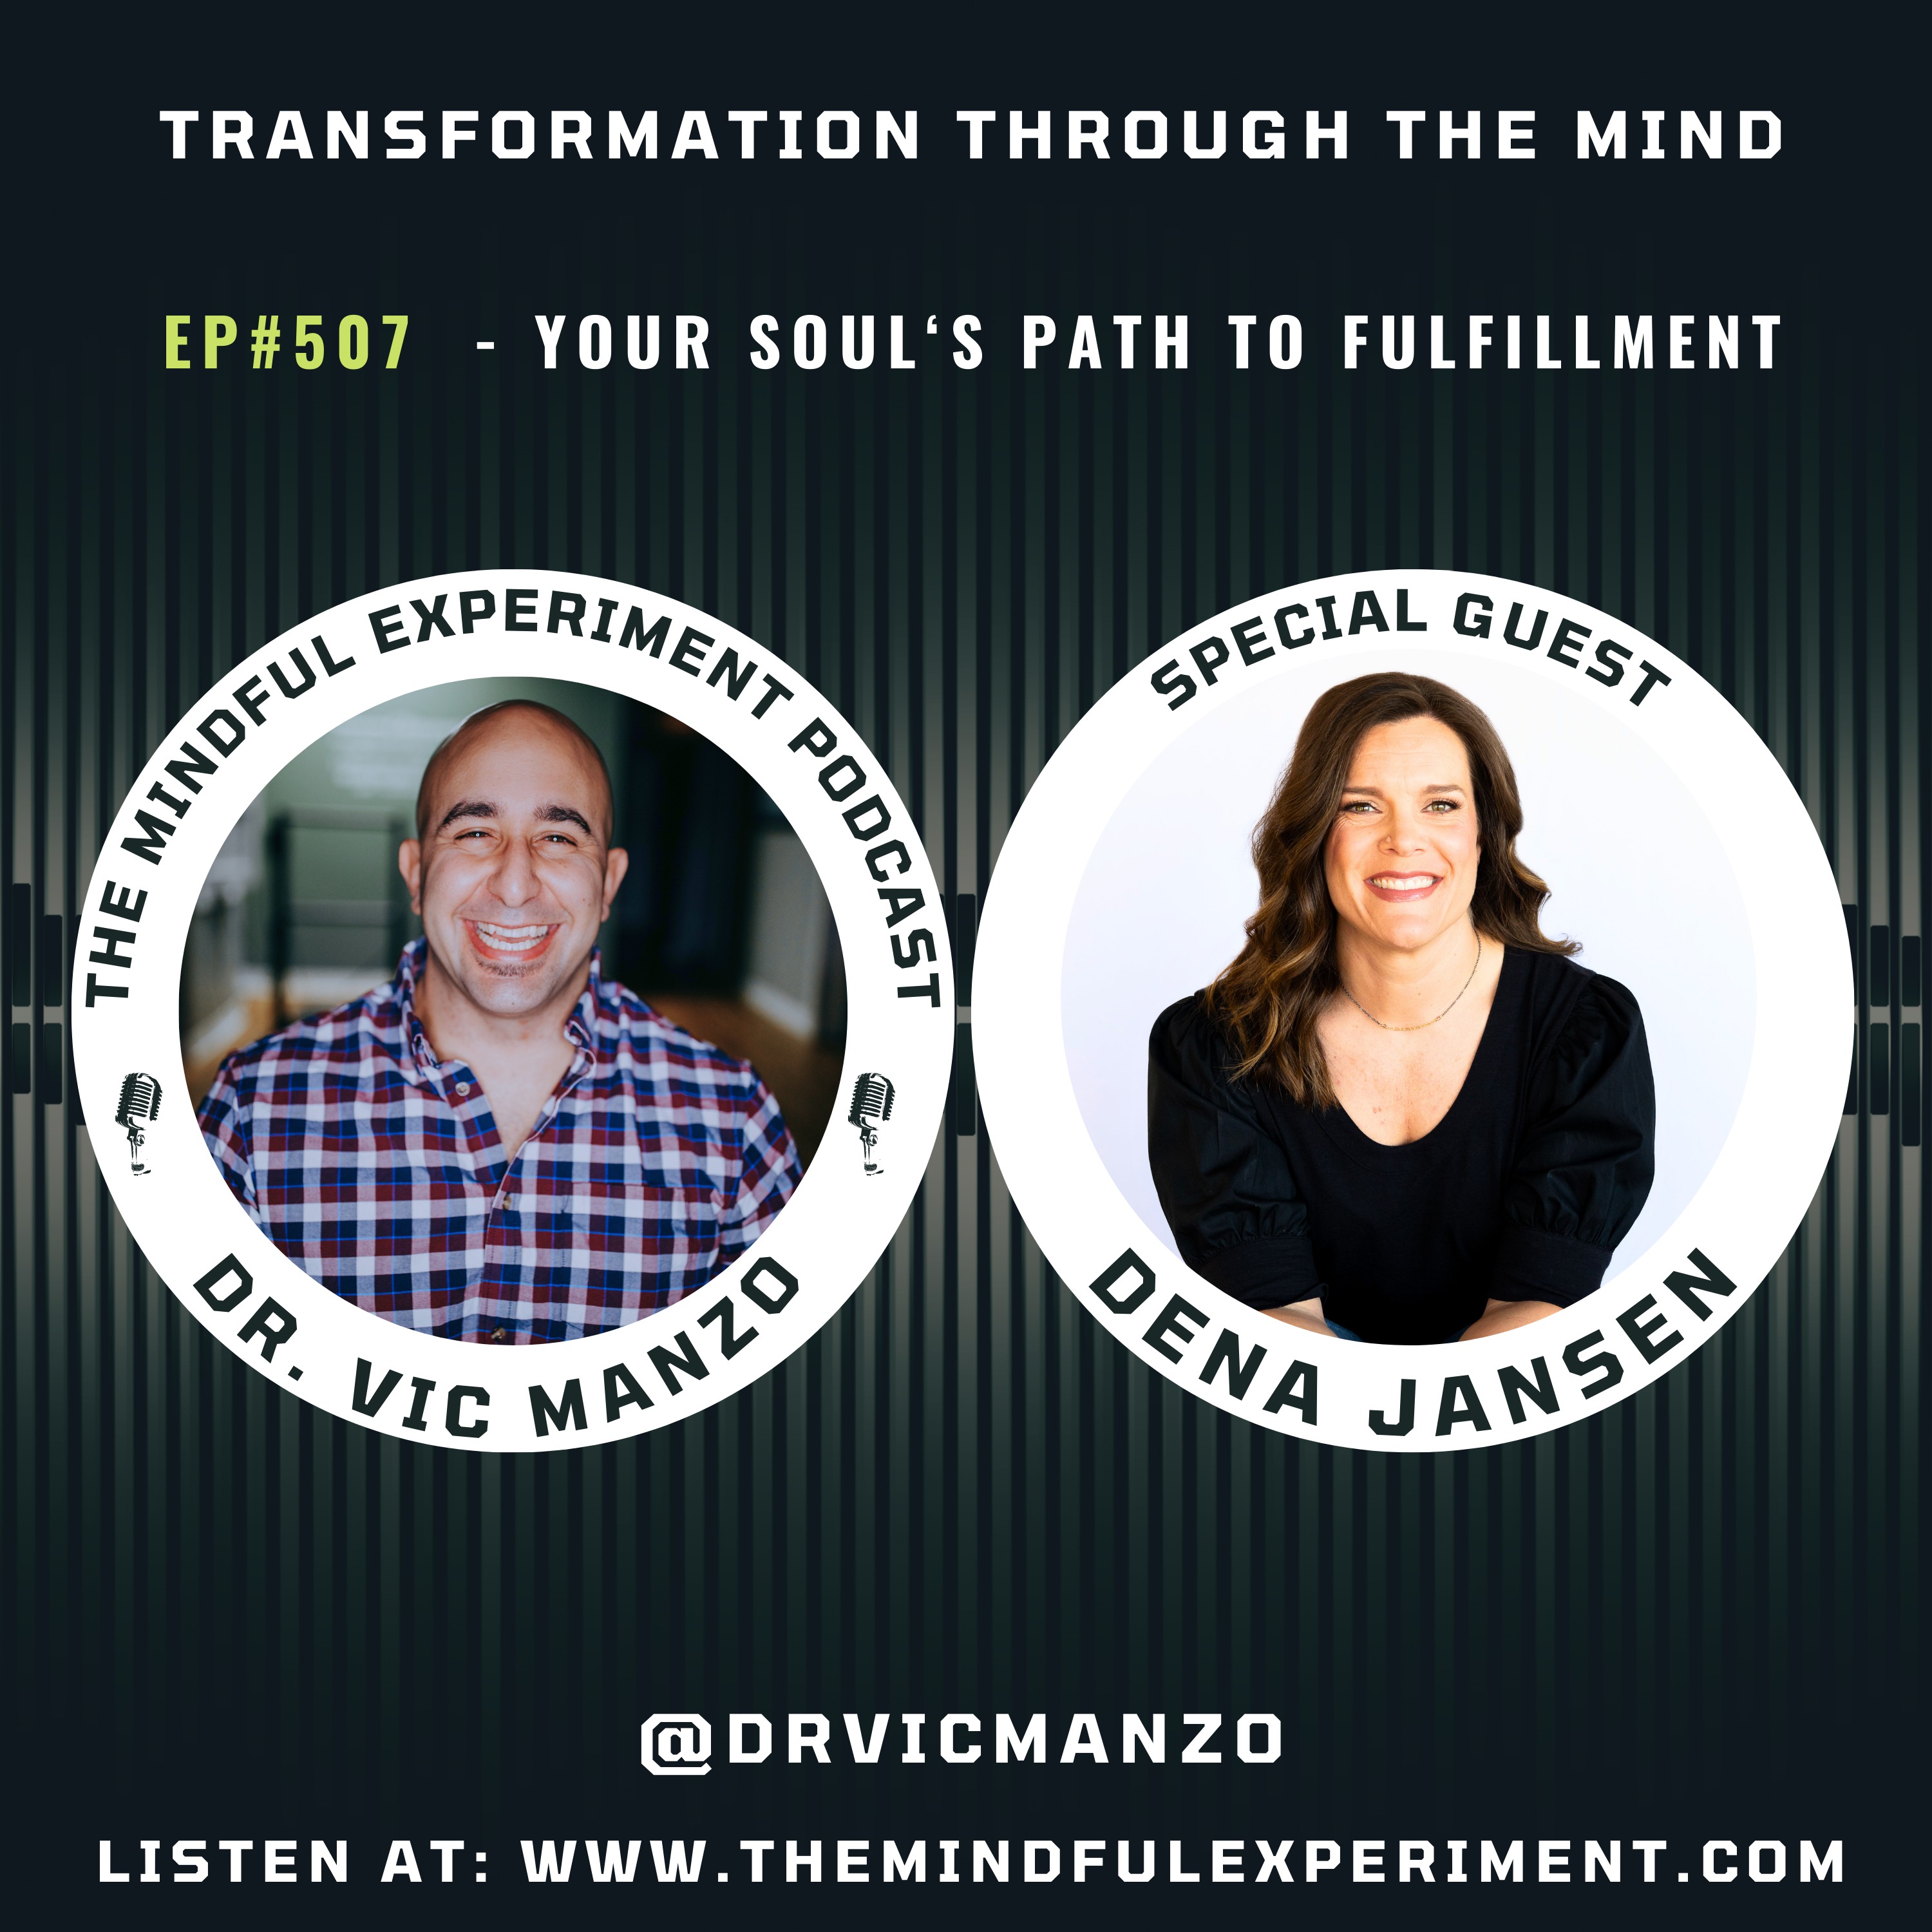 EP#507 - Your Soul's Path to Fulfillment with Special Guest: Dena Jansen